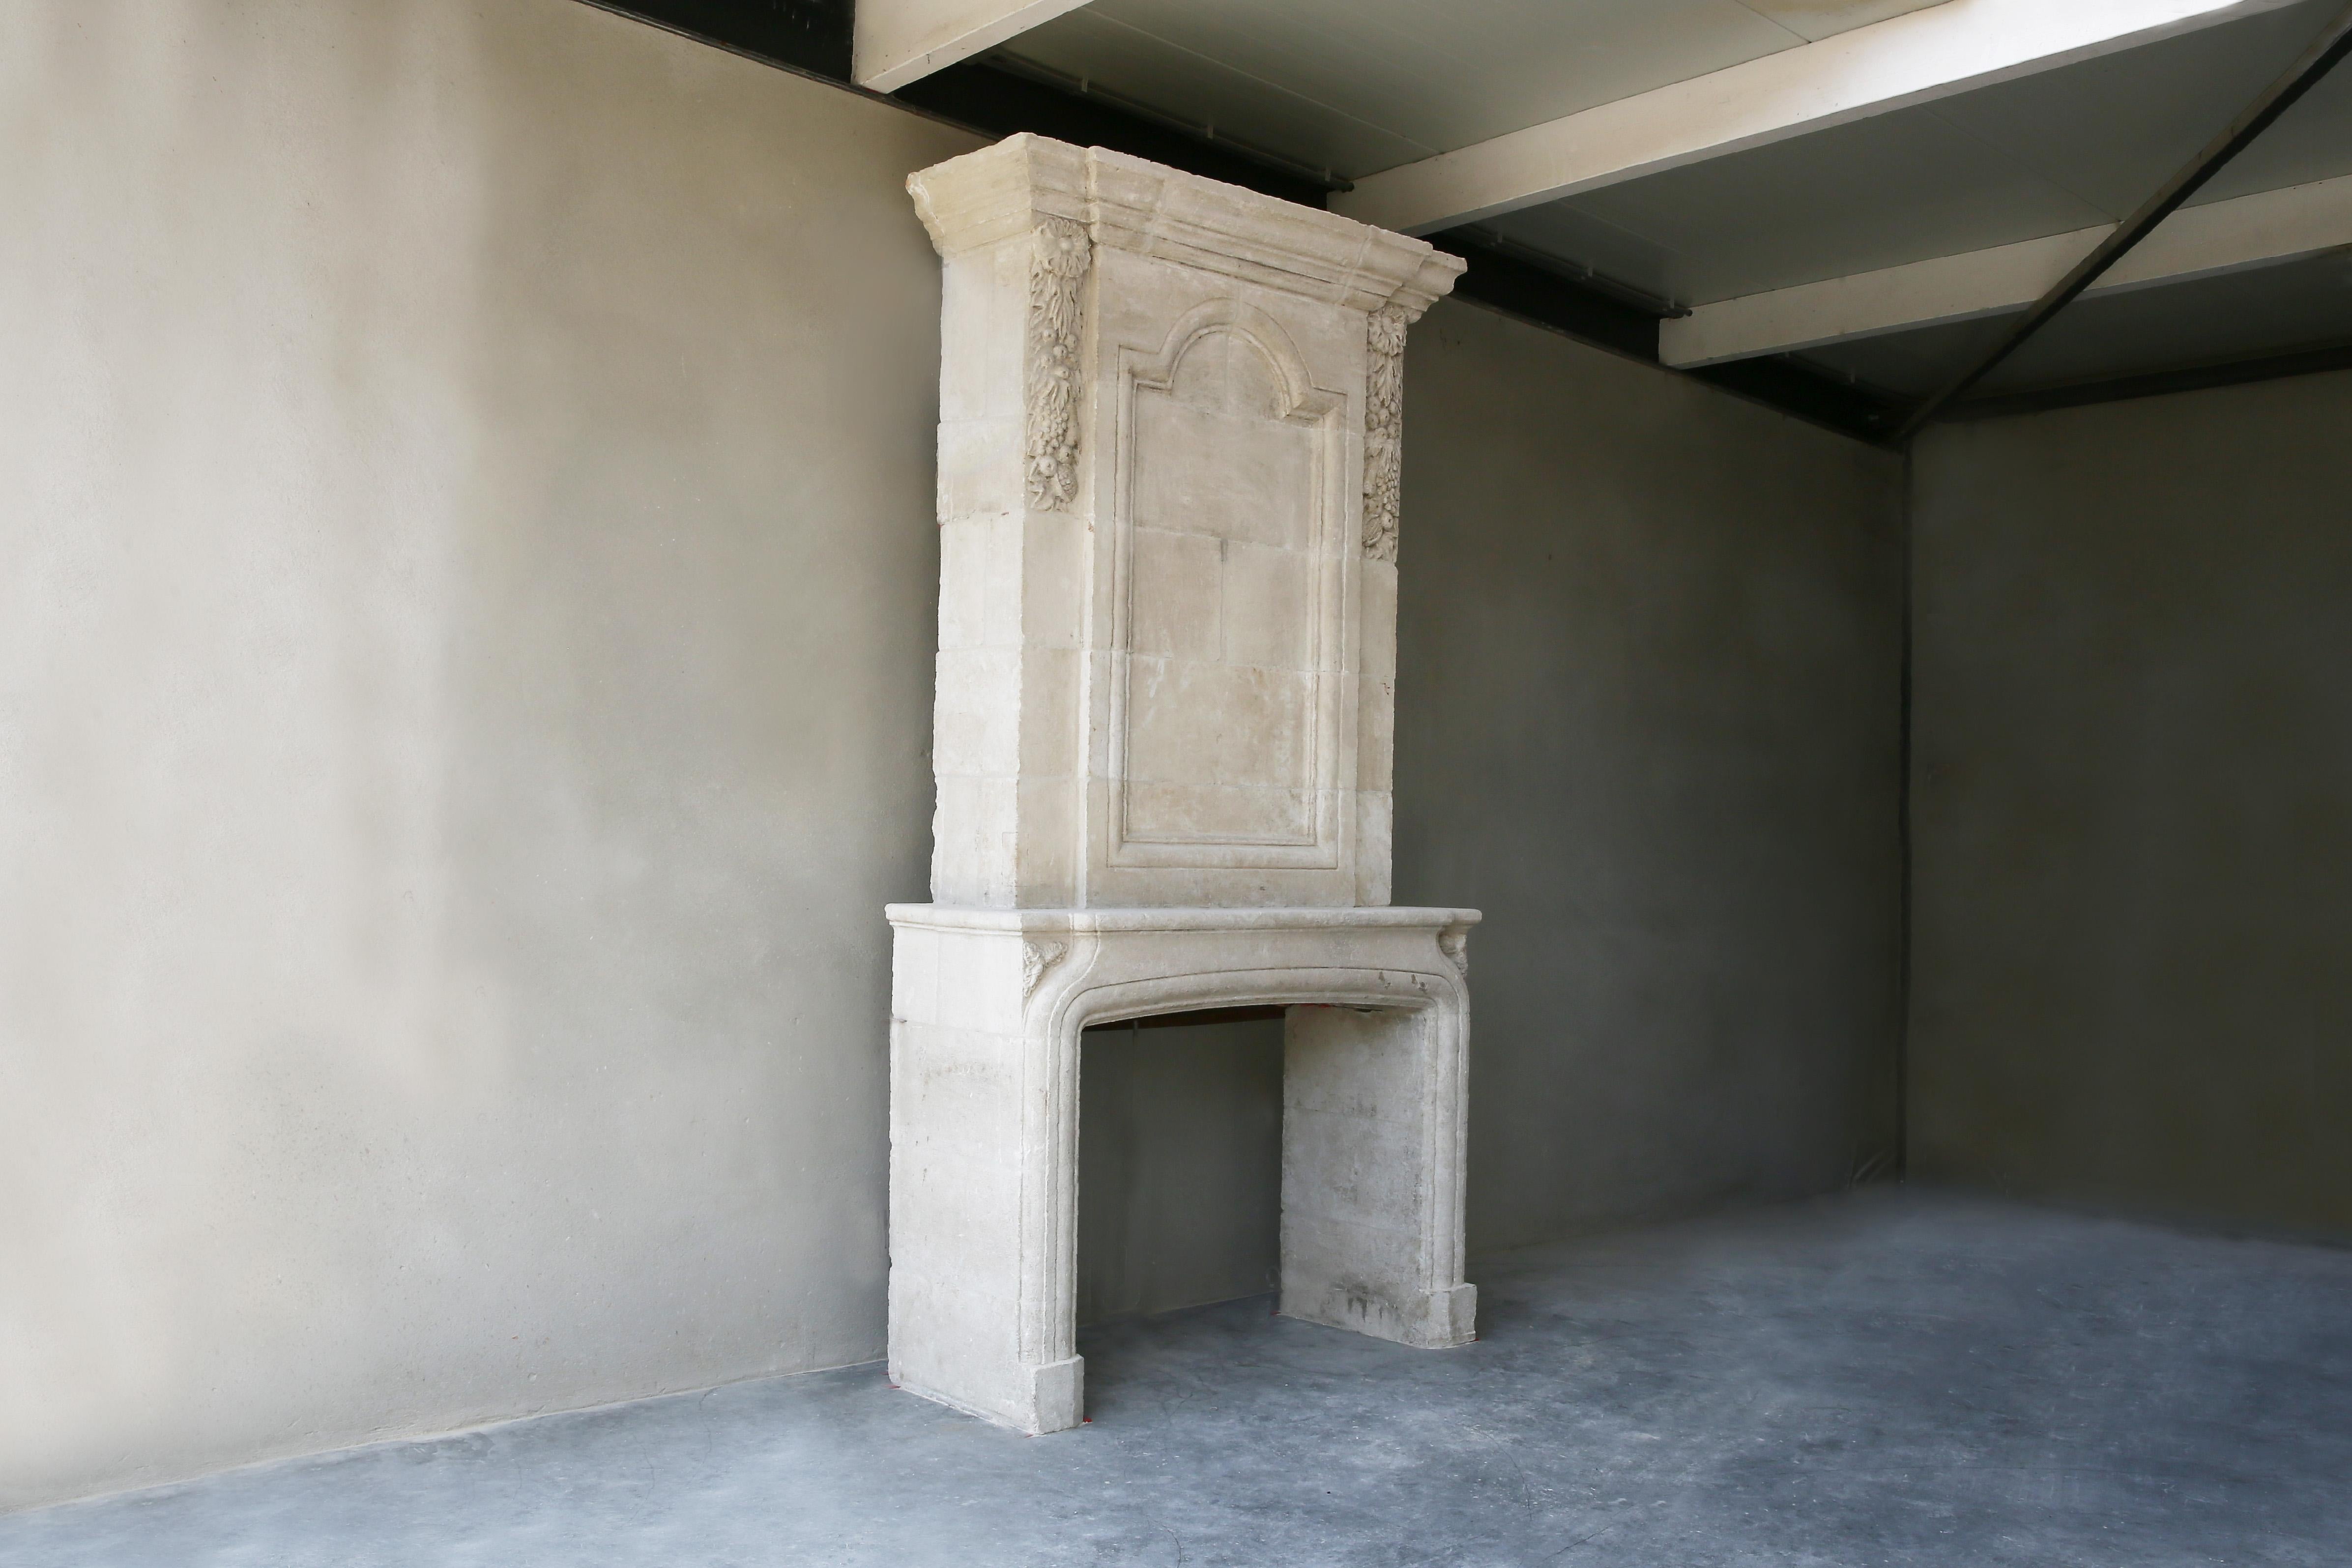 Nice replica fireplace made of French limestone including trumeau. The fireplace is made of French limestone and is made in the style of Louis XIII. There has been a small break in the front section, but it has been restored so well that you can no